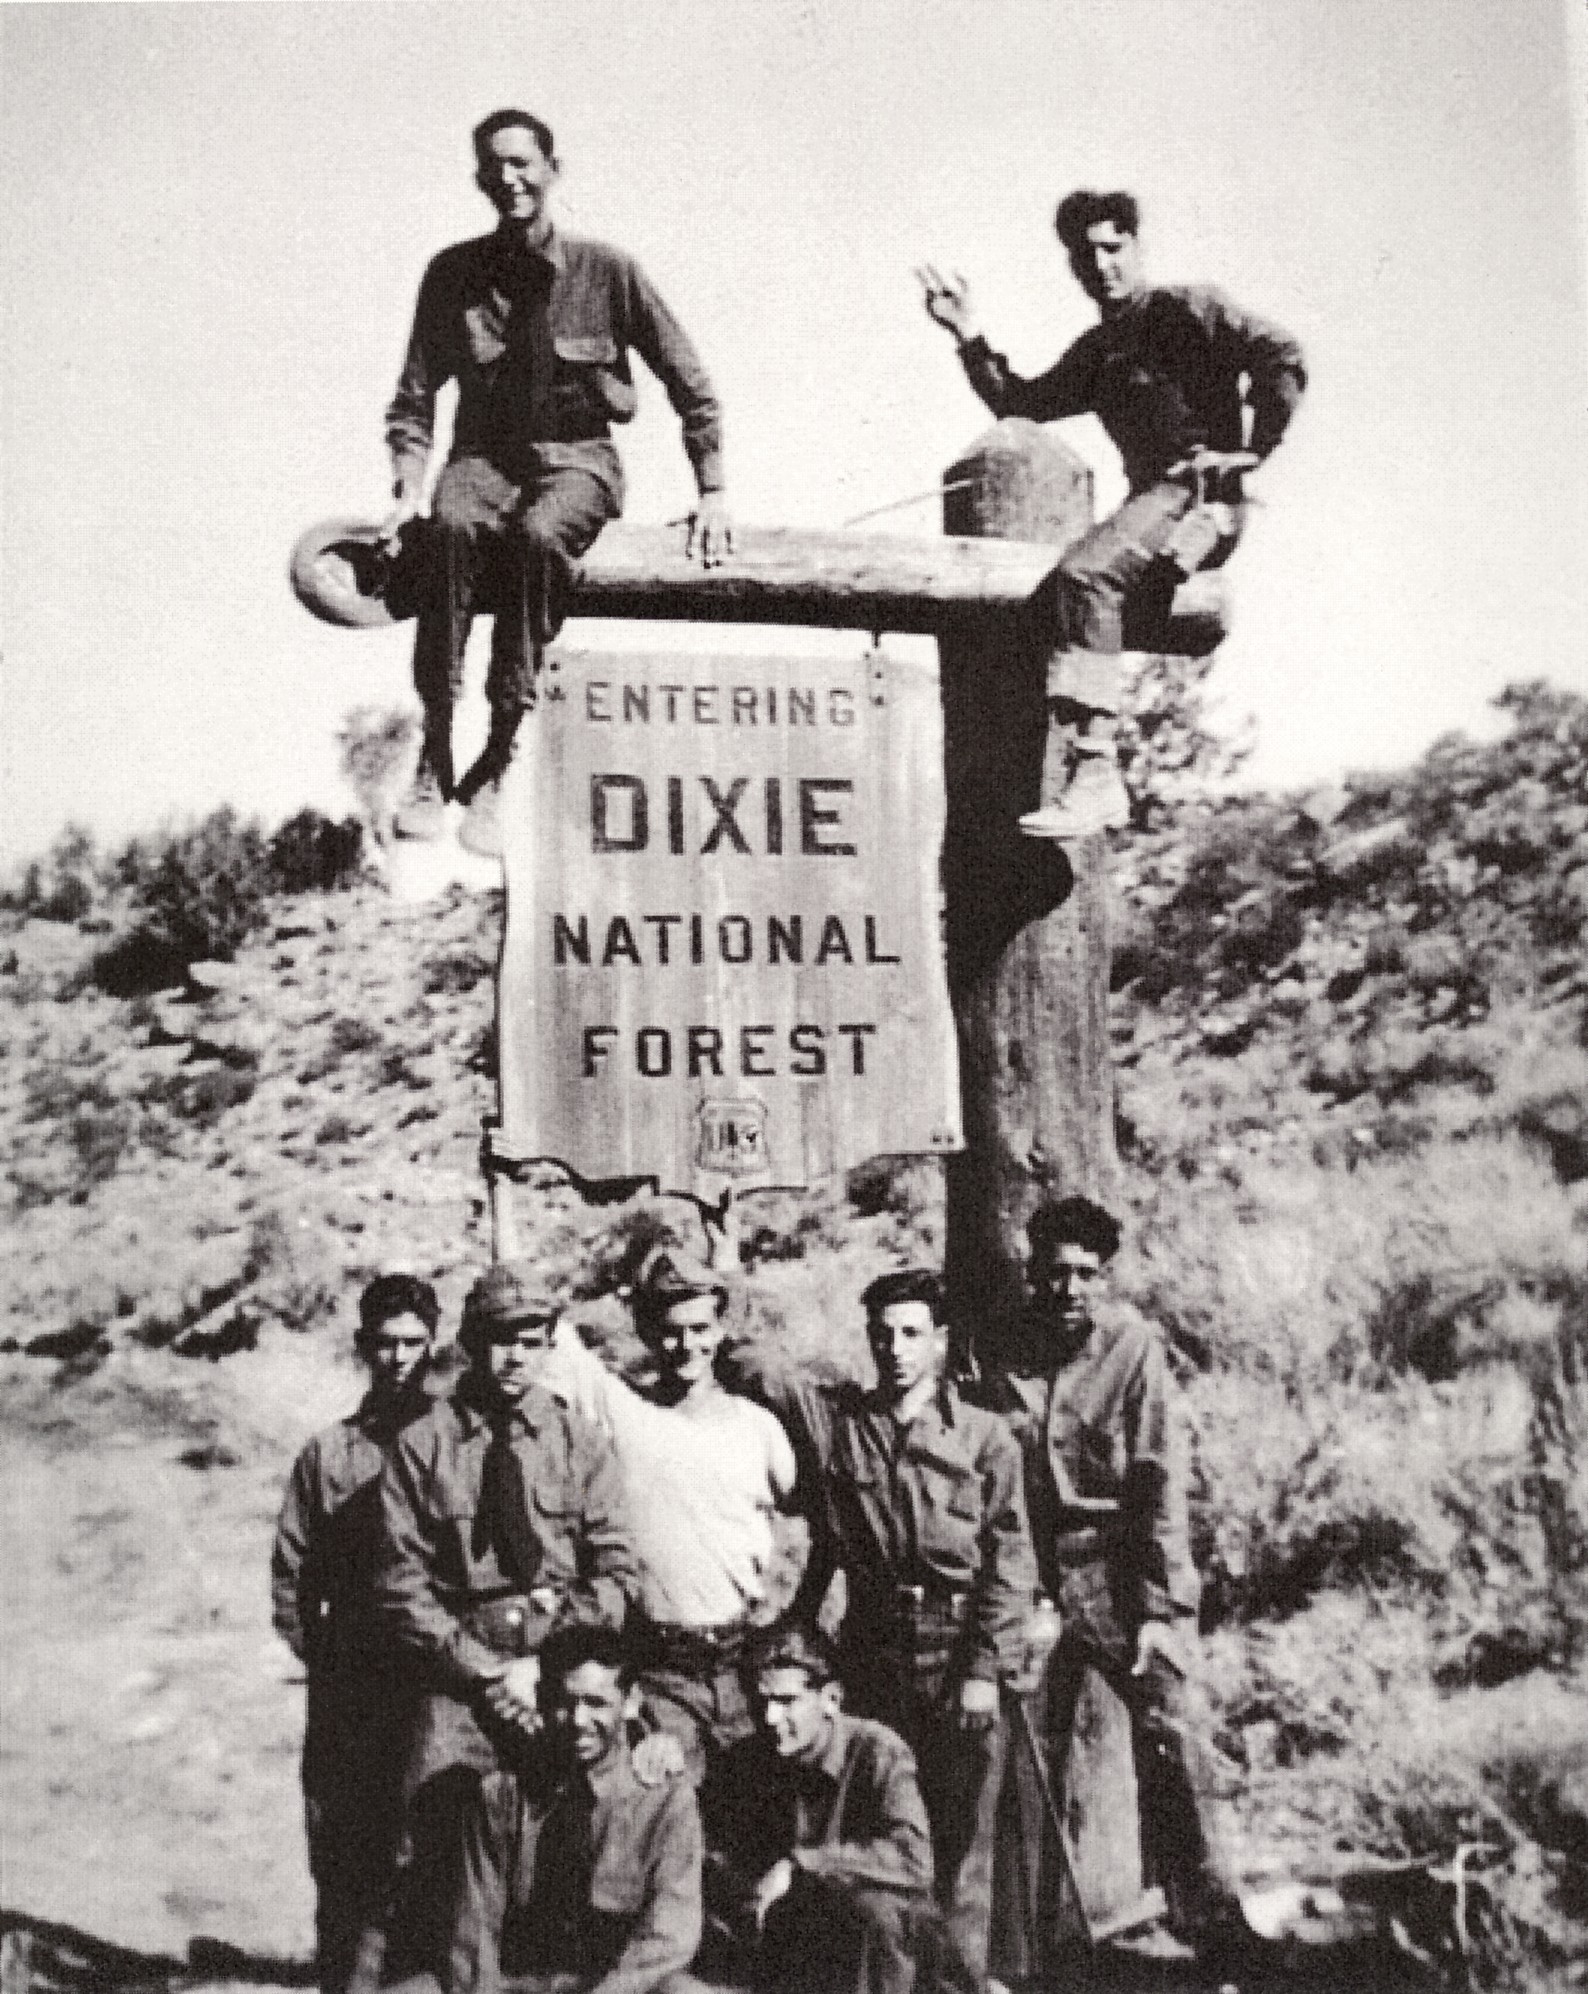 WCHS-00505 Dixie National Forest sign and CCC enrollees